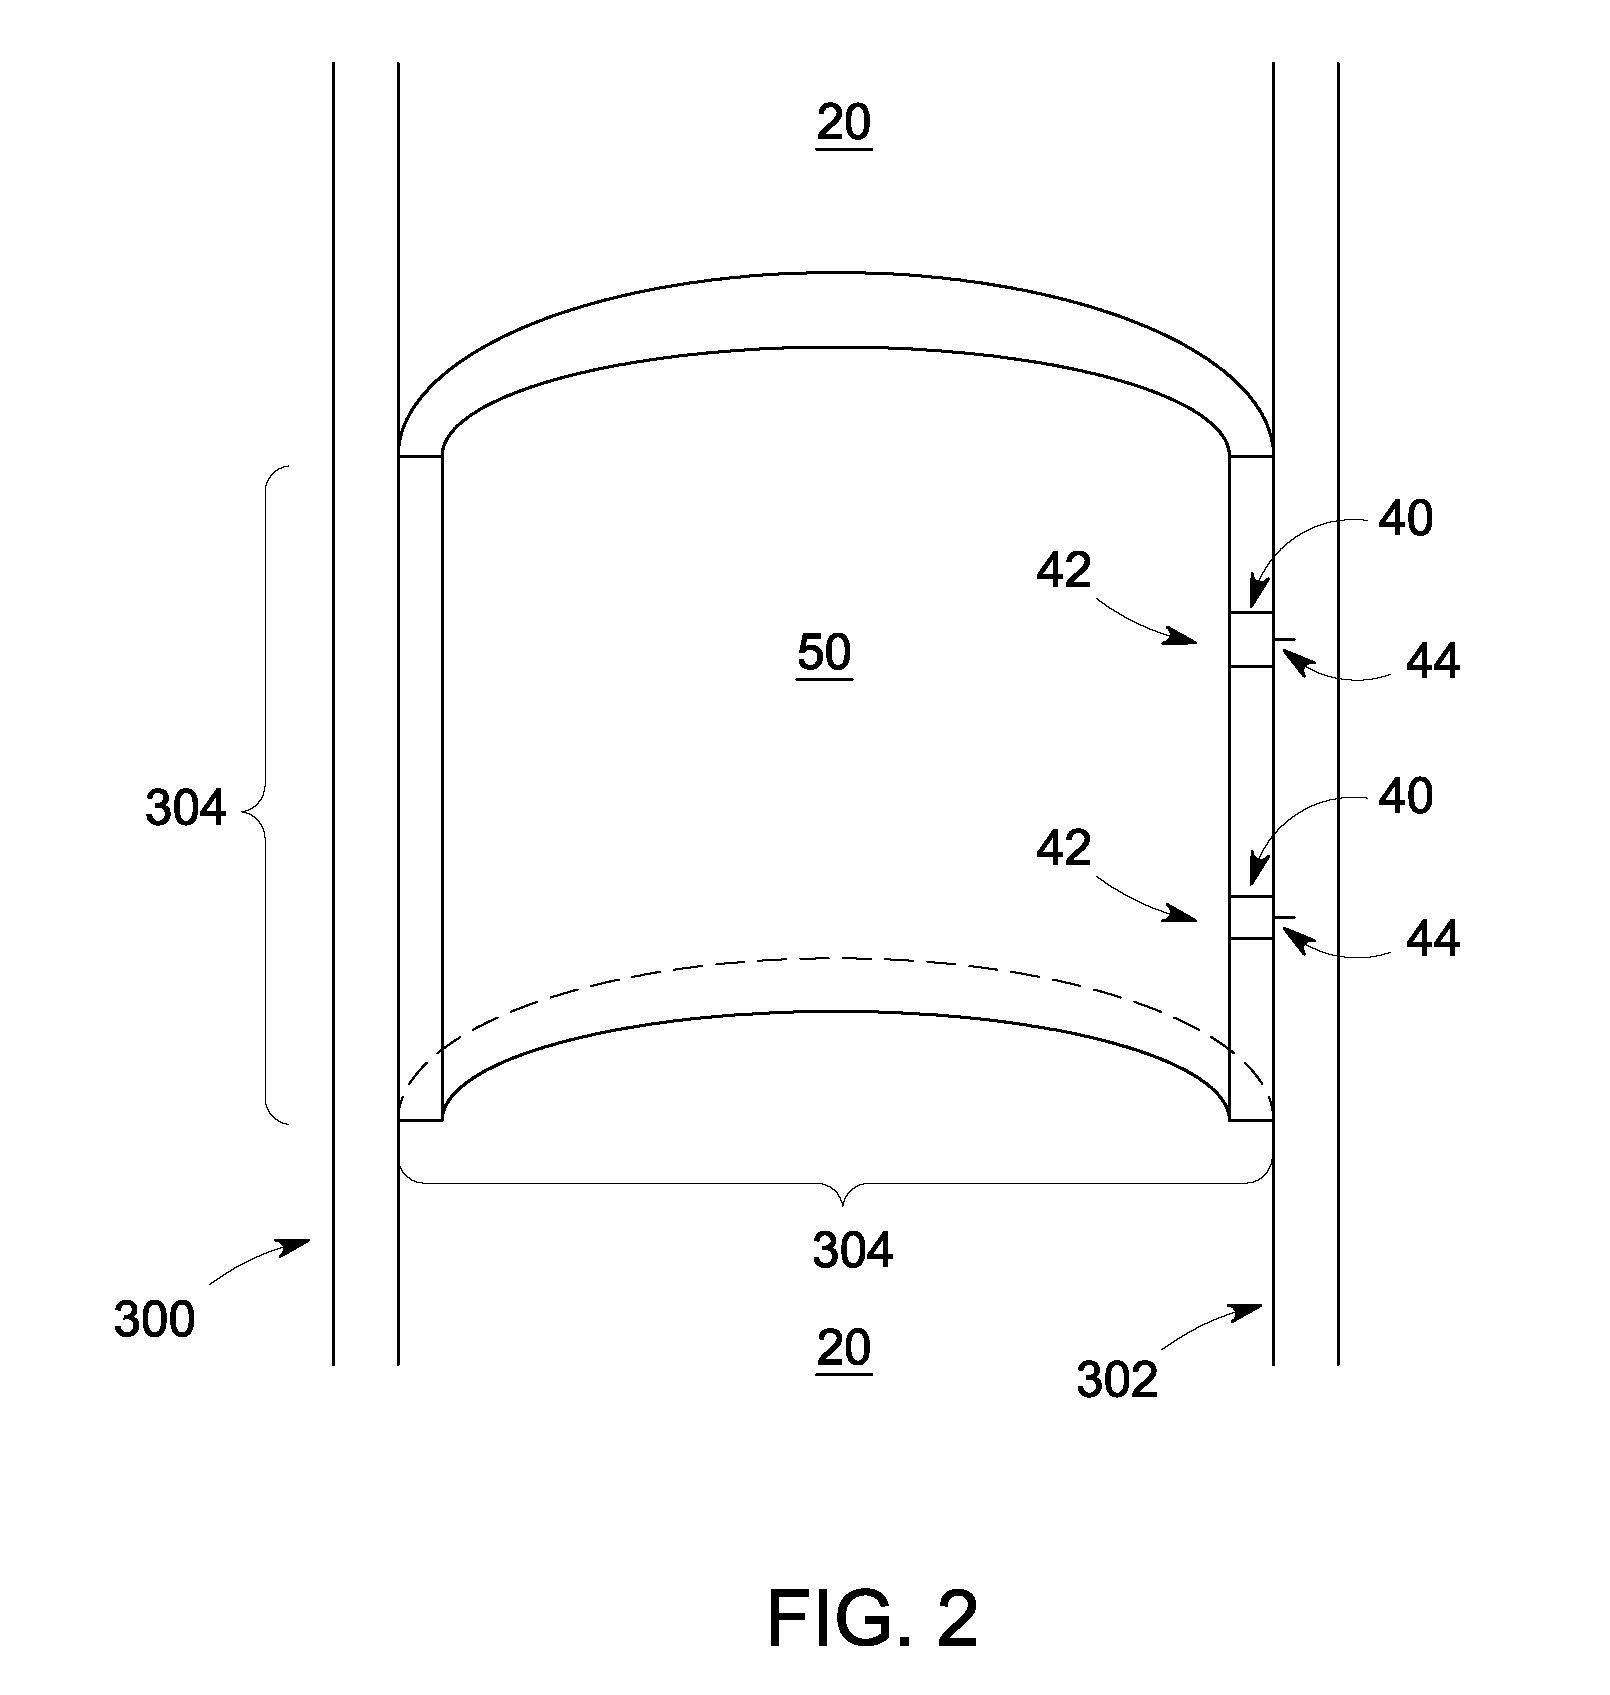 Apparatus for use in determining a plurality of characteristics of a multiphase flow within a pipe